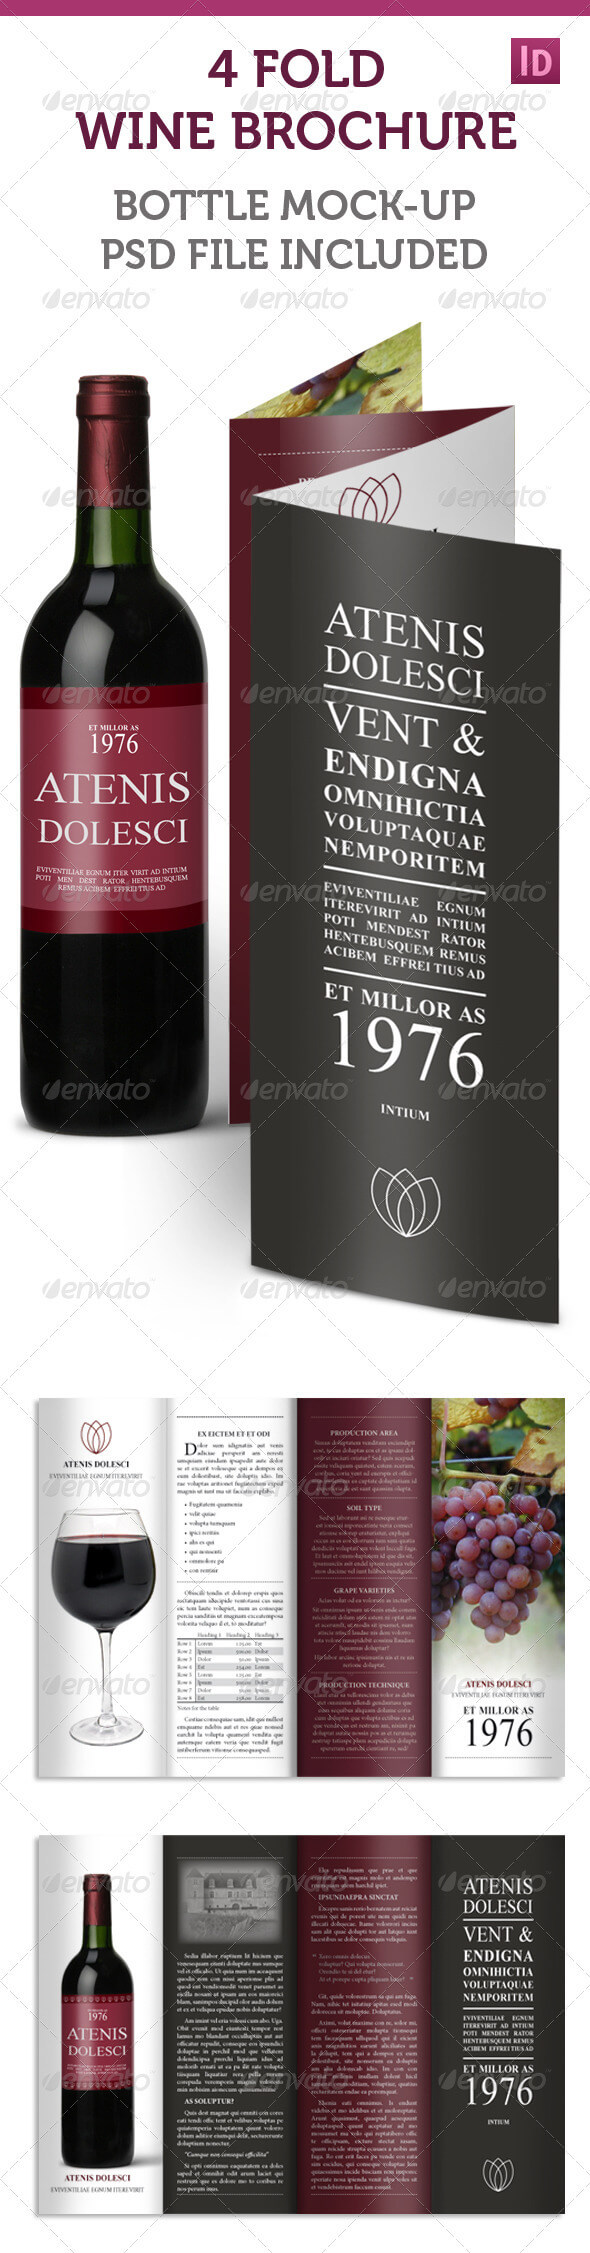 Wine Brochure Templates From Graphicriver Throughout Wine Brochure Template